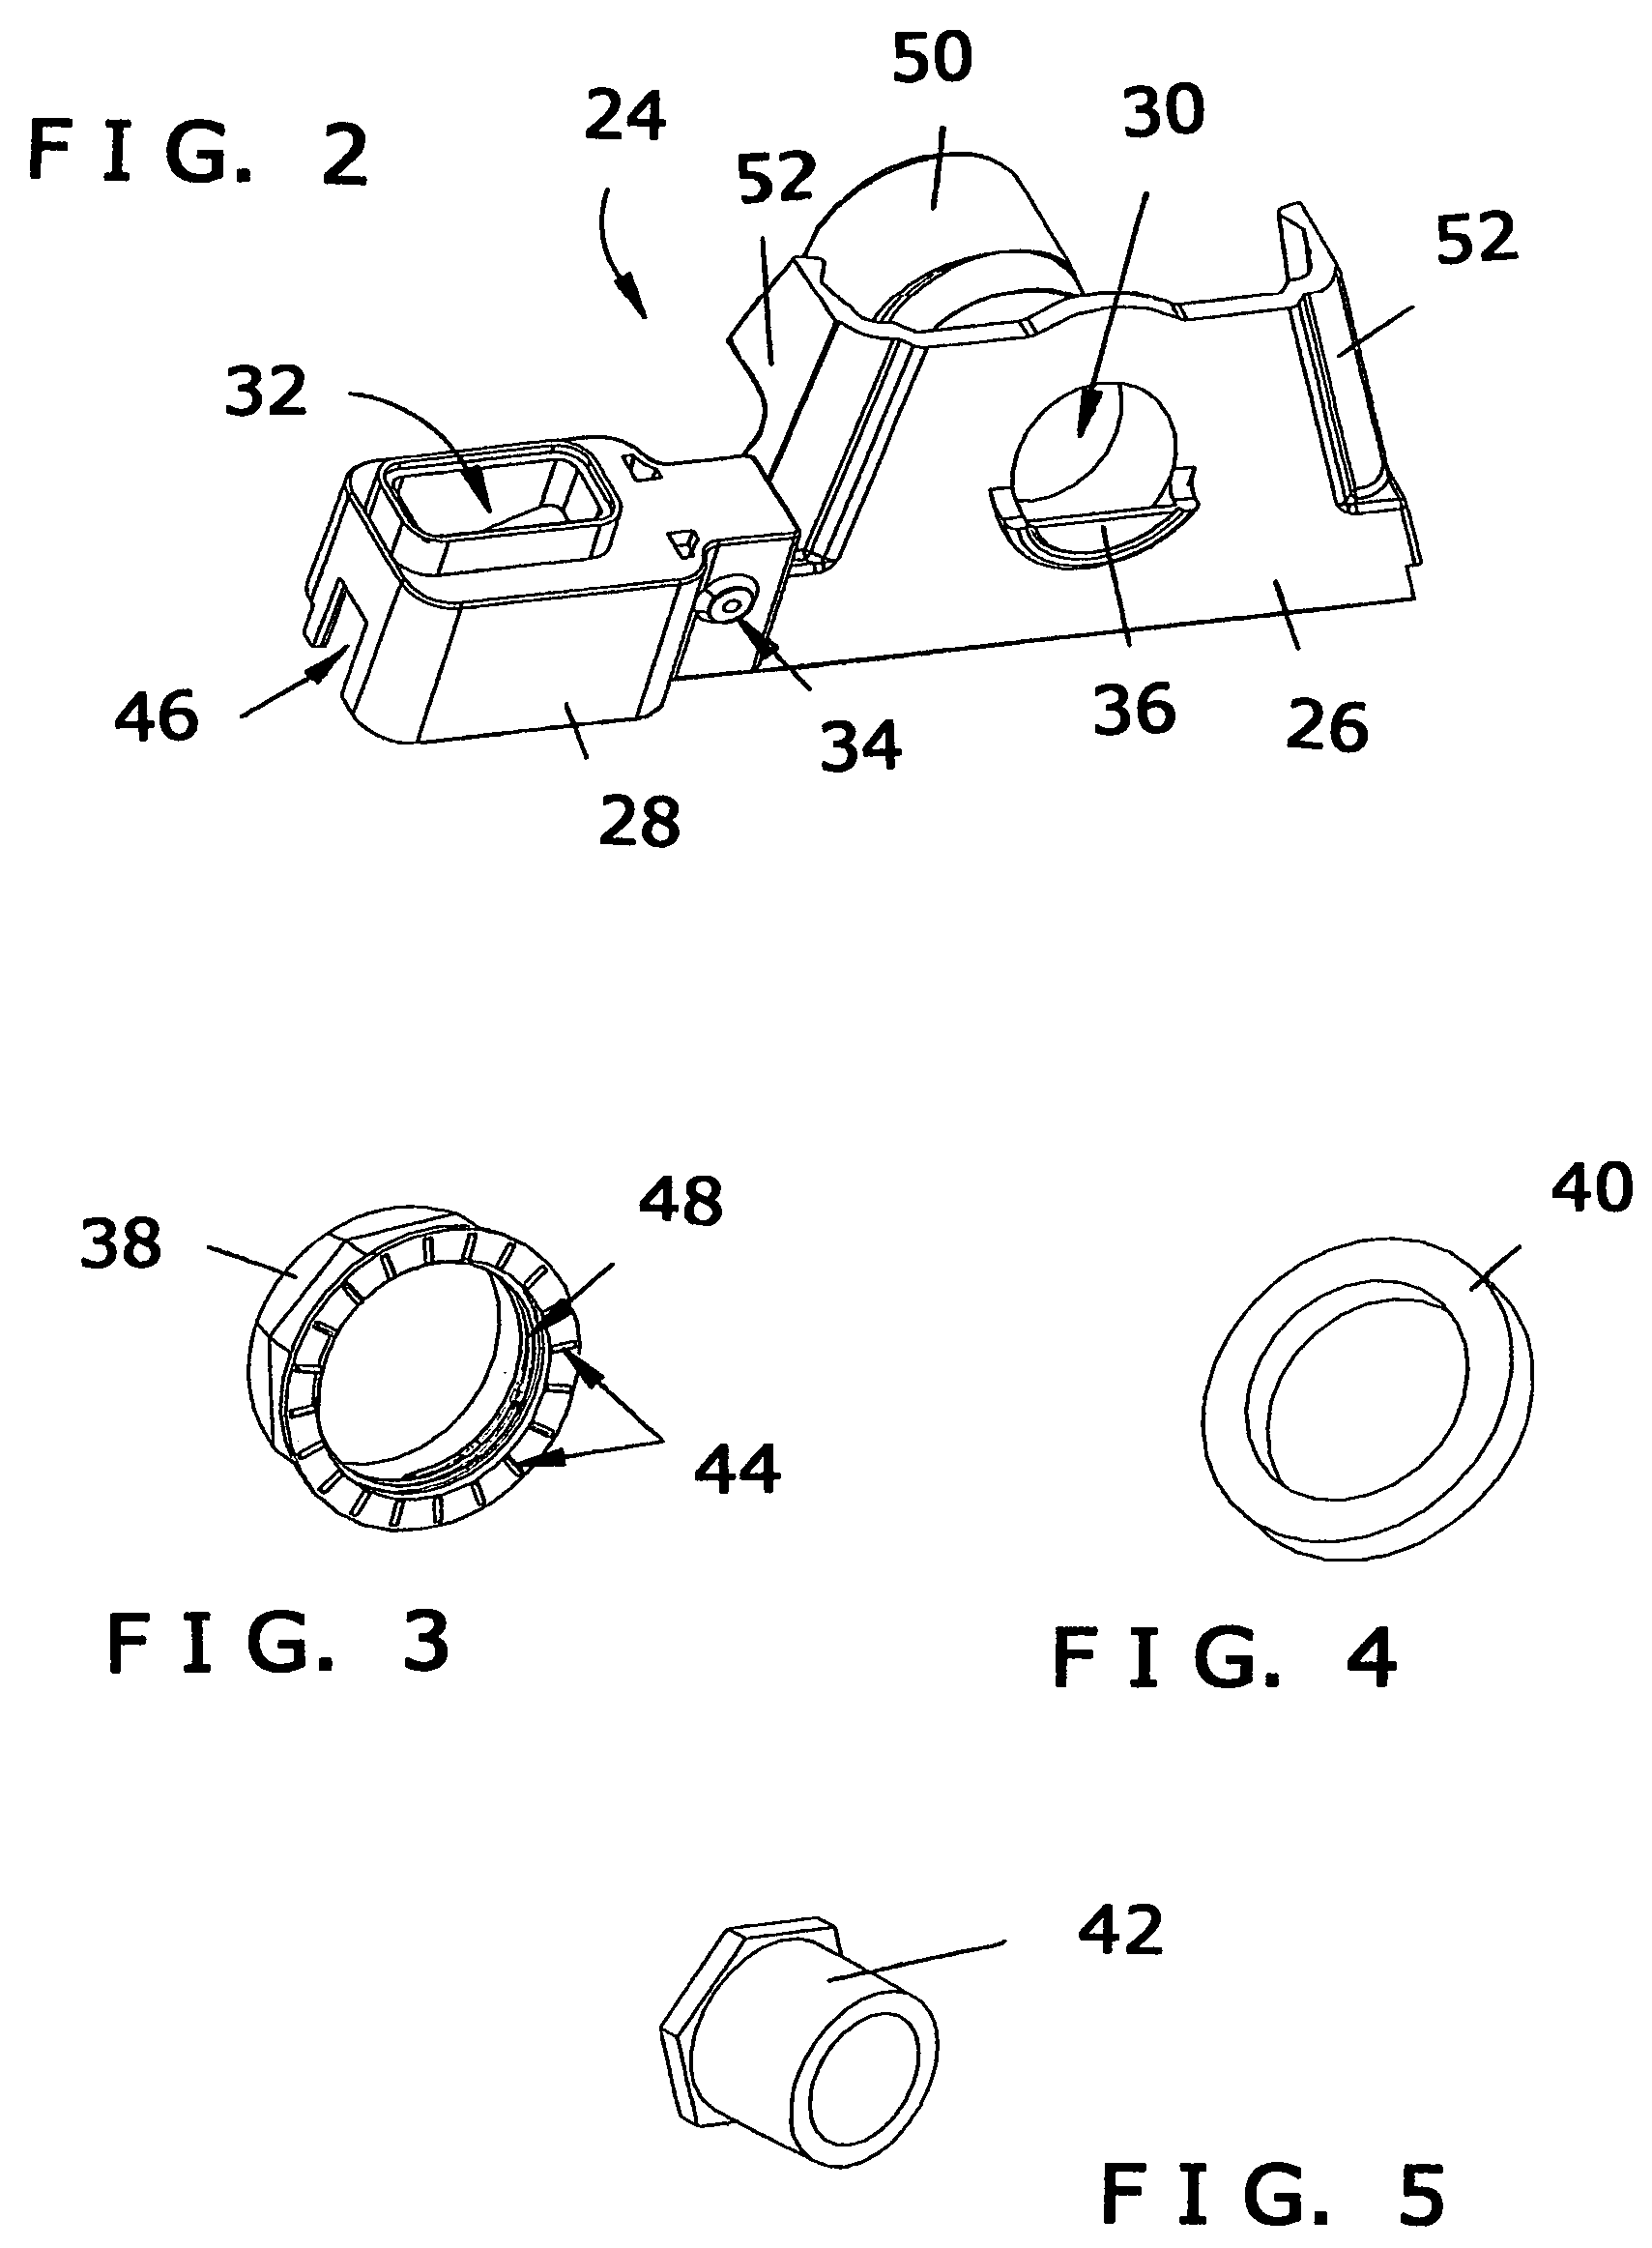 Fluid-level sensing device with encapsulated micro switch